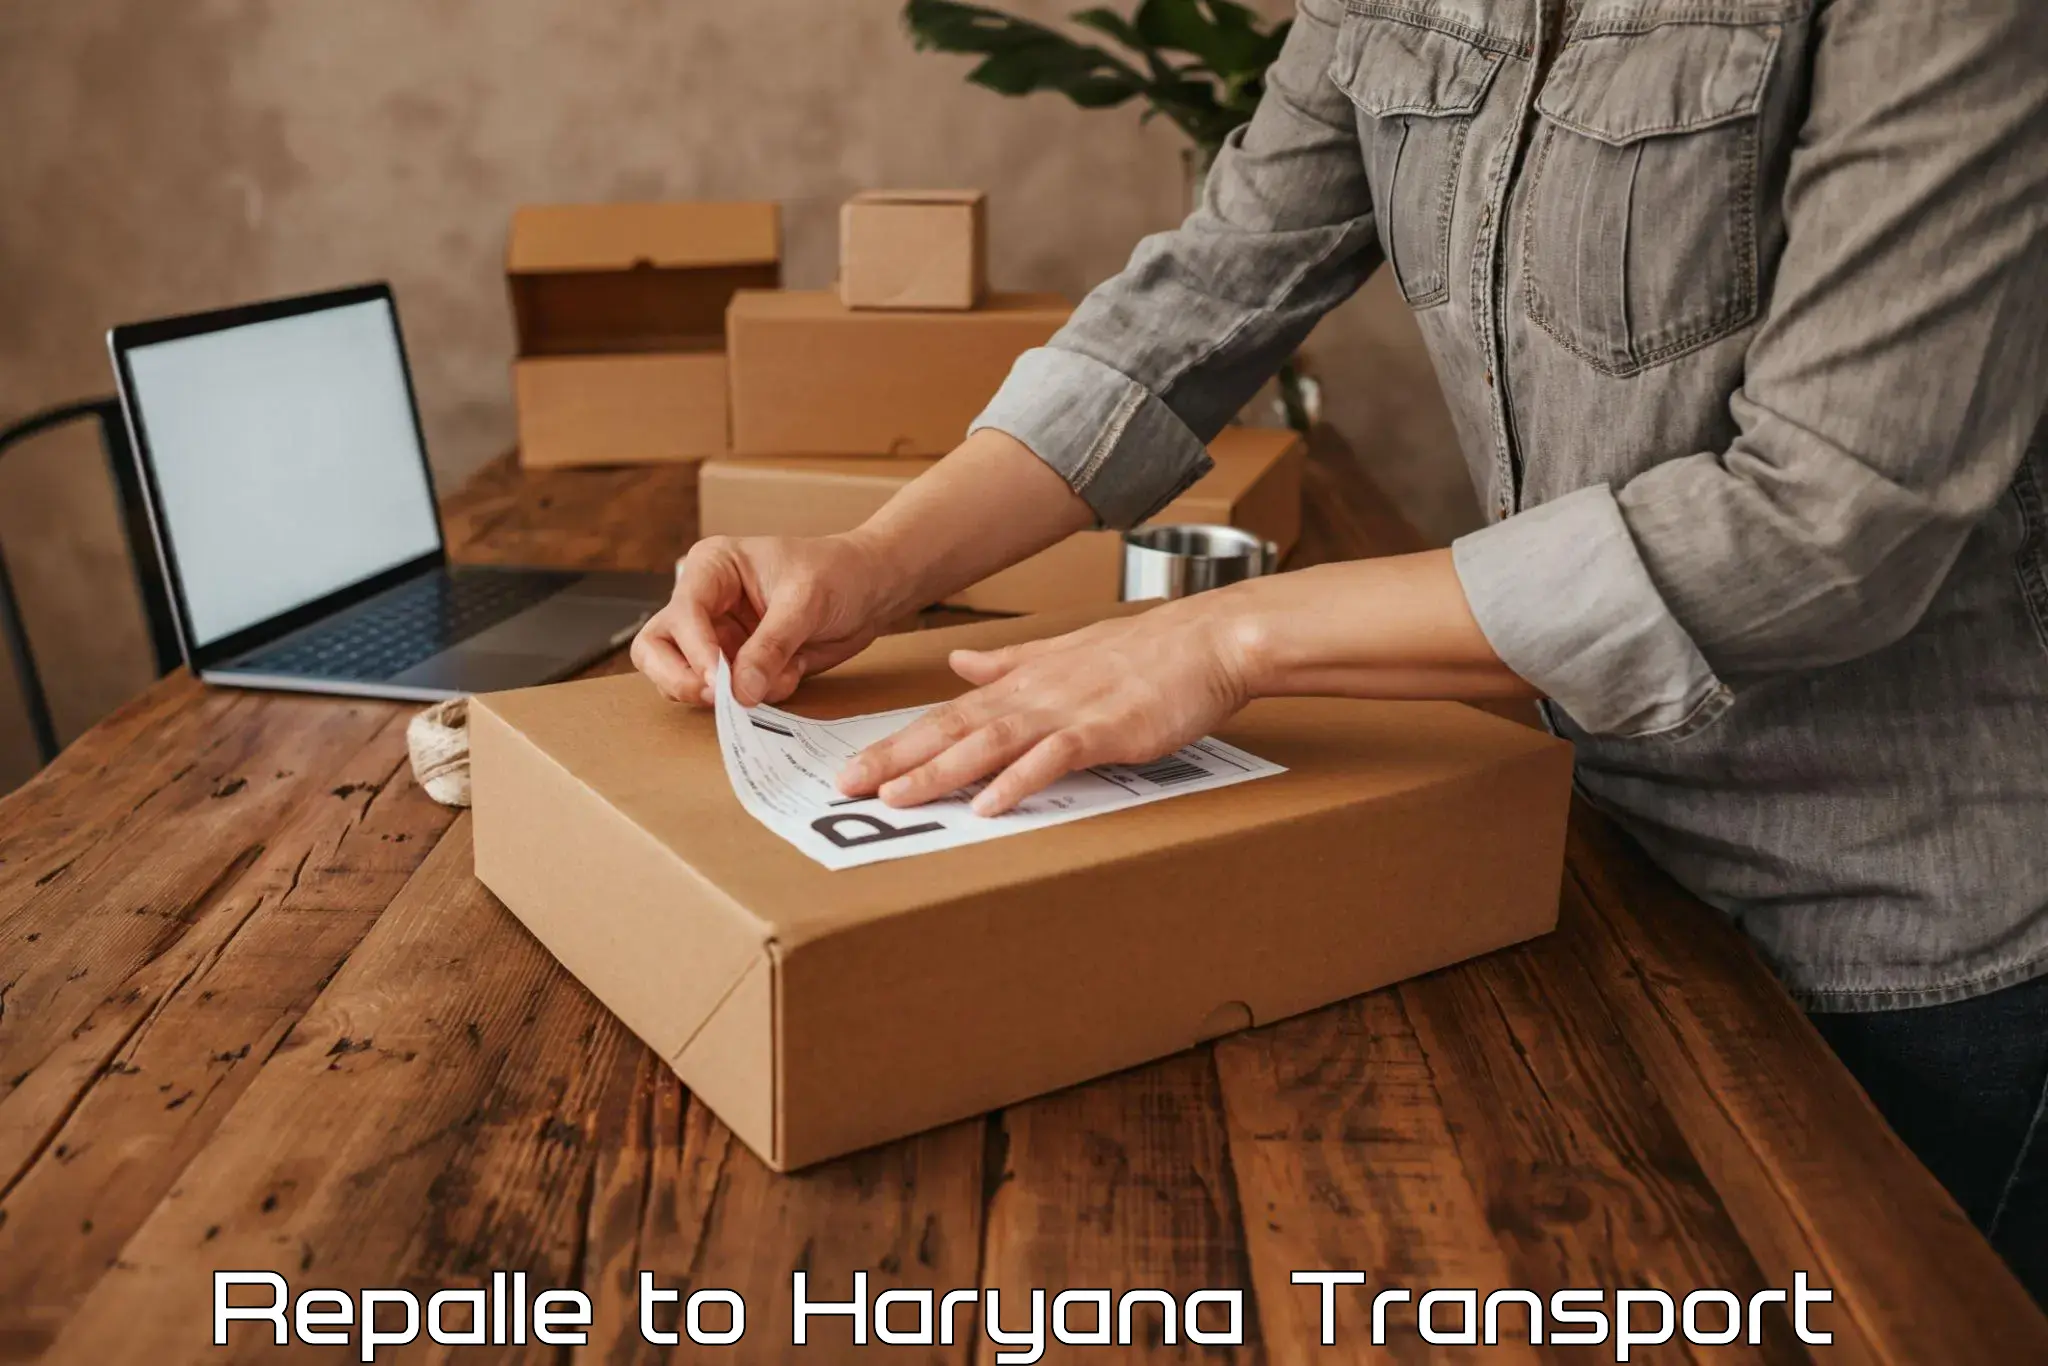 Two wheeler parcel service Repalle to NCR Haryana